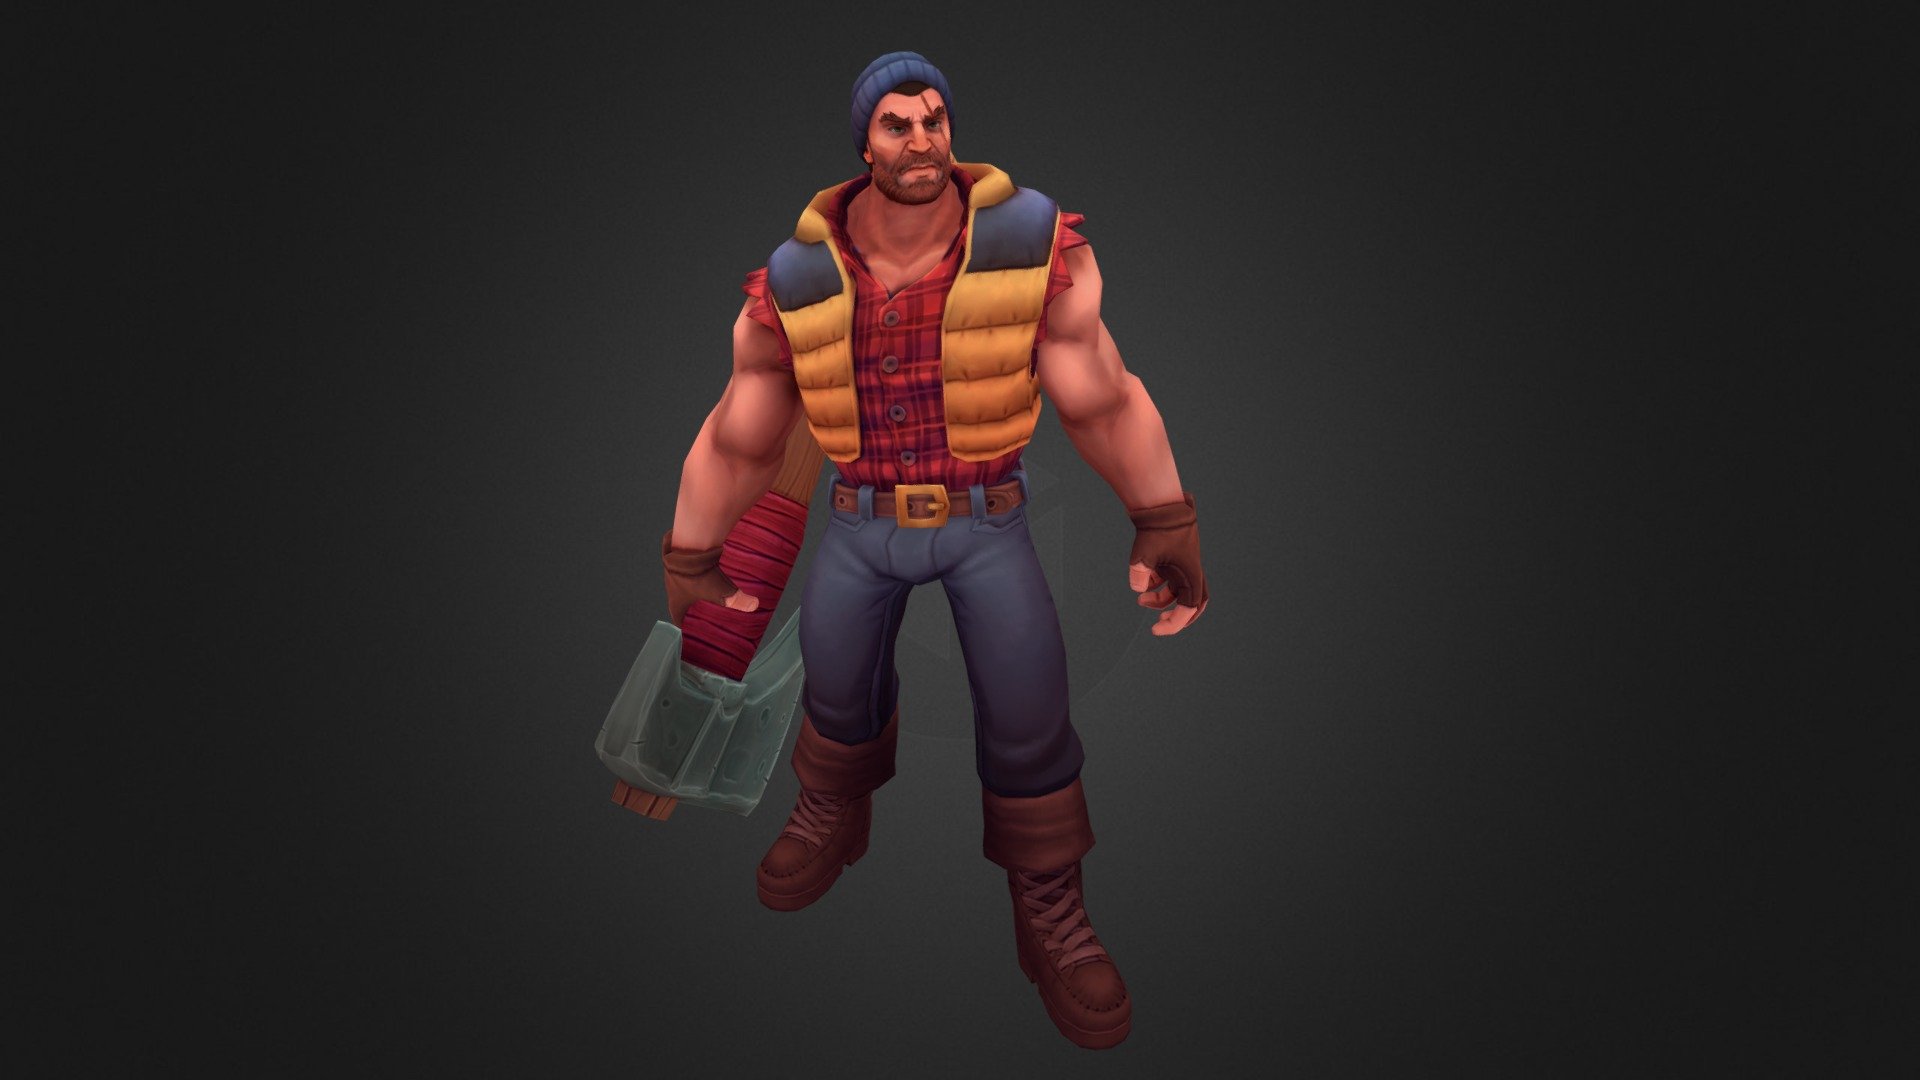 This model I made as part of the Riot Contest 2017 in polycount forum. You can check the whole process in this link: http://polycount.com/discussion/193614/riot-creative-contest-2017-lumberjack-darius/p1?new=1

You can follow my work at Artstation: https://www.artstation.com/lavolpx - Lumberjack Darius - Riot Contest 2017 - Download Free 3D model by yararocha 3d model